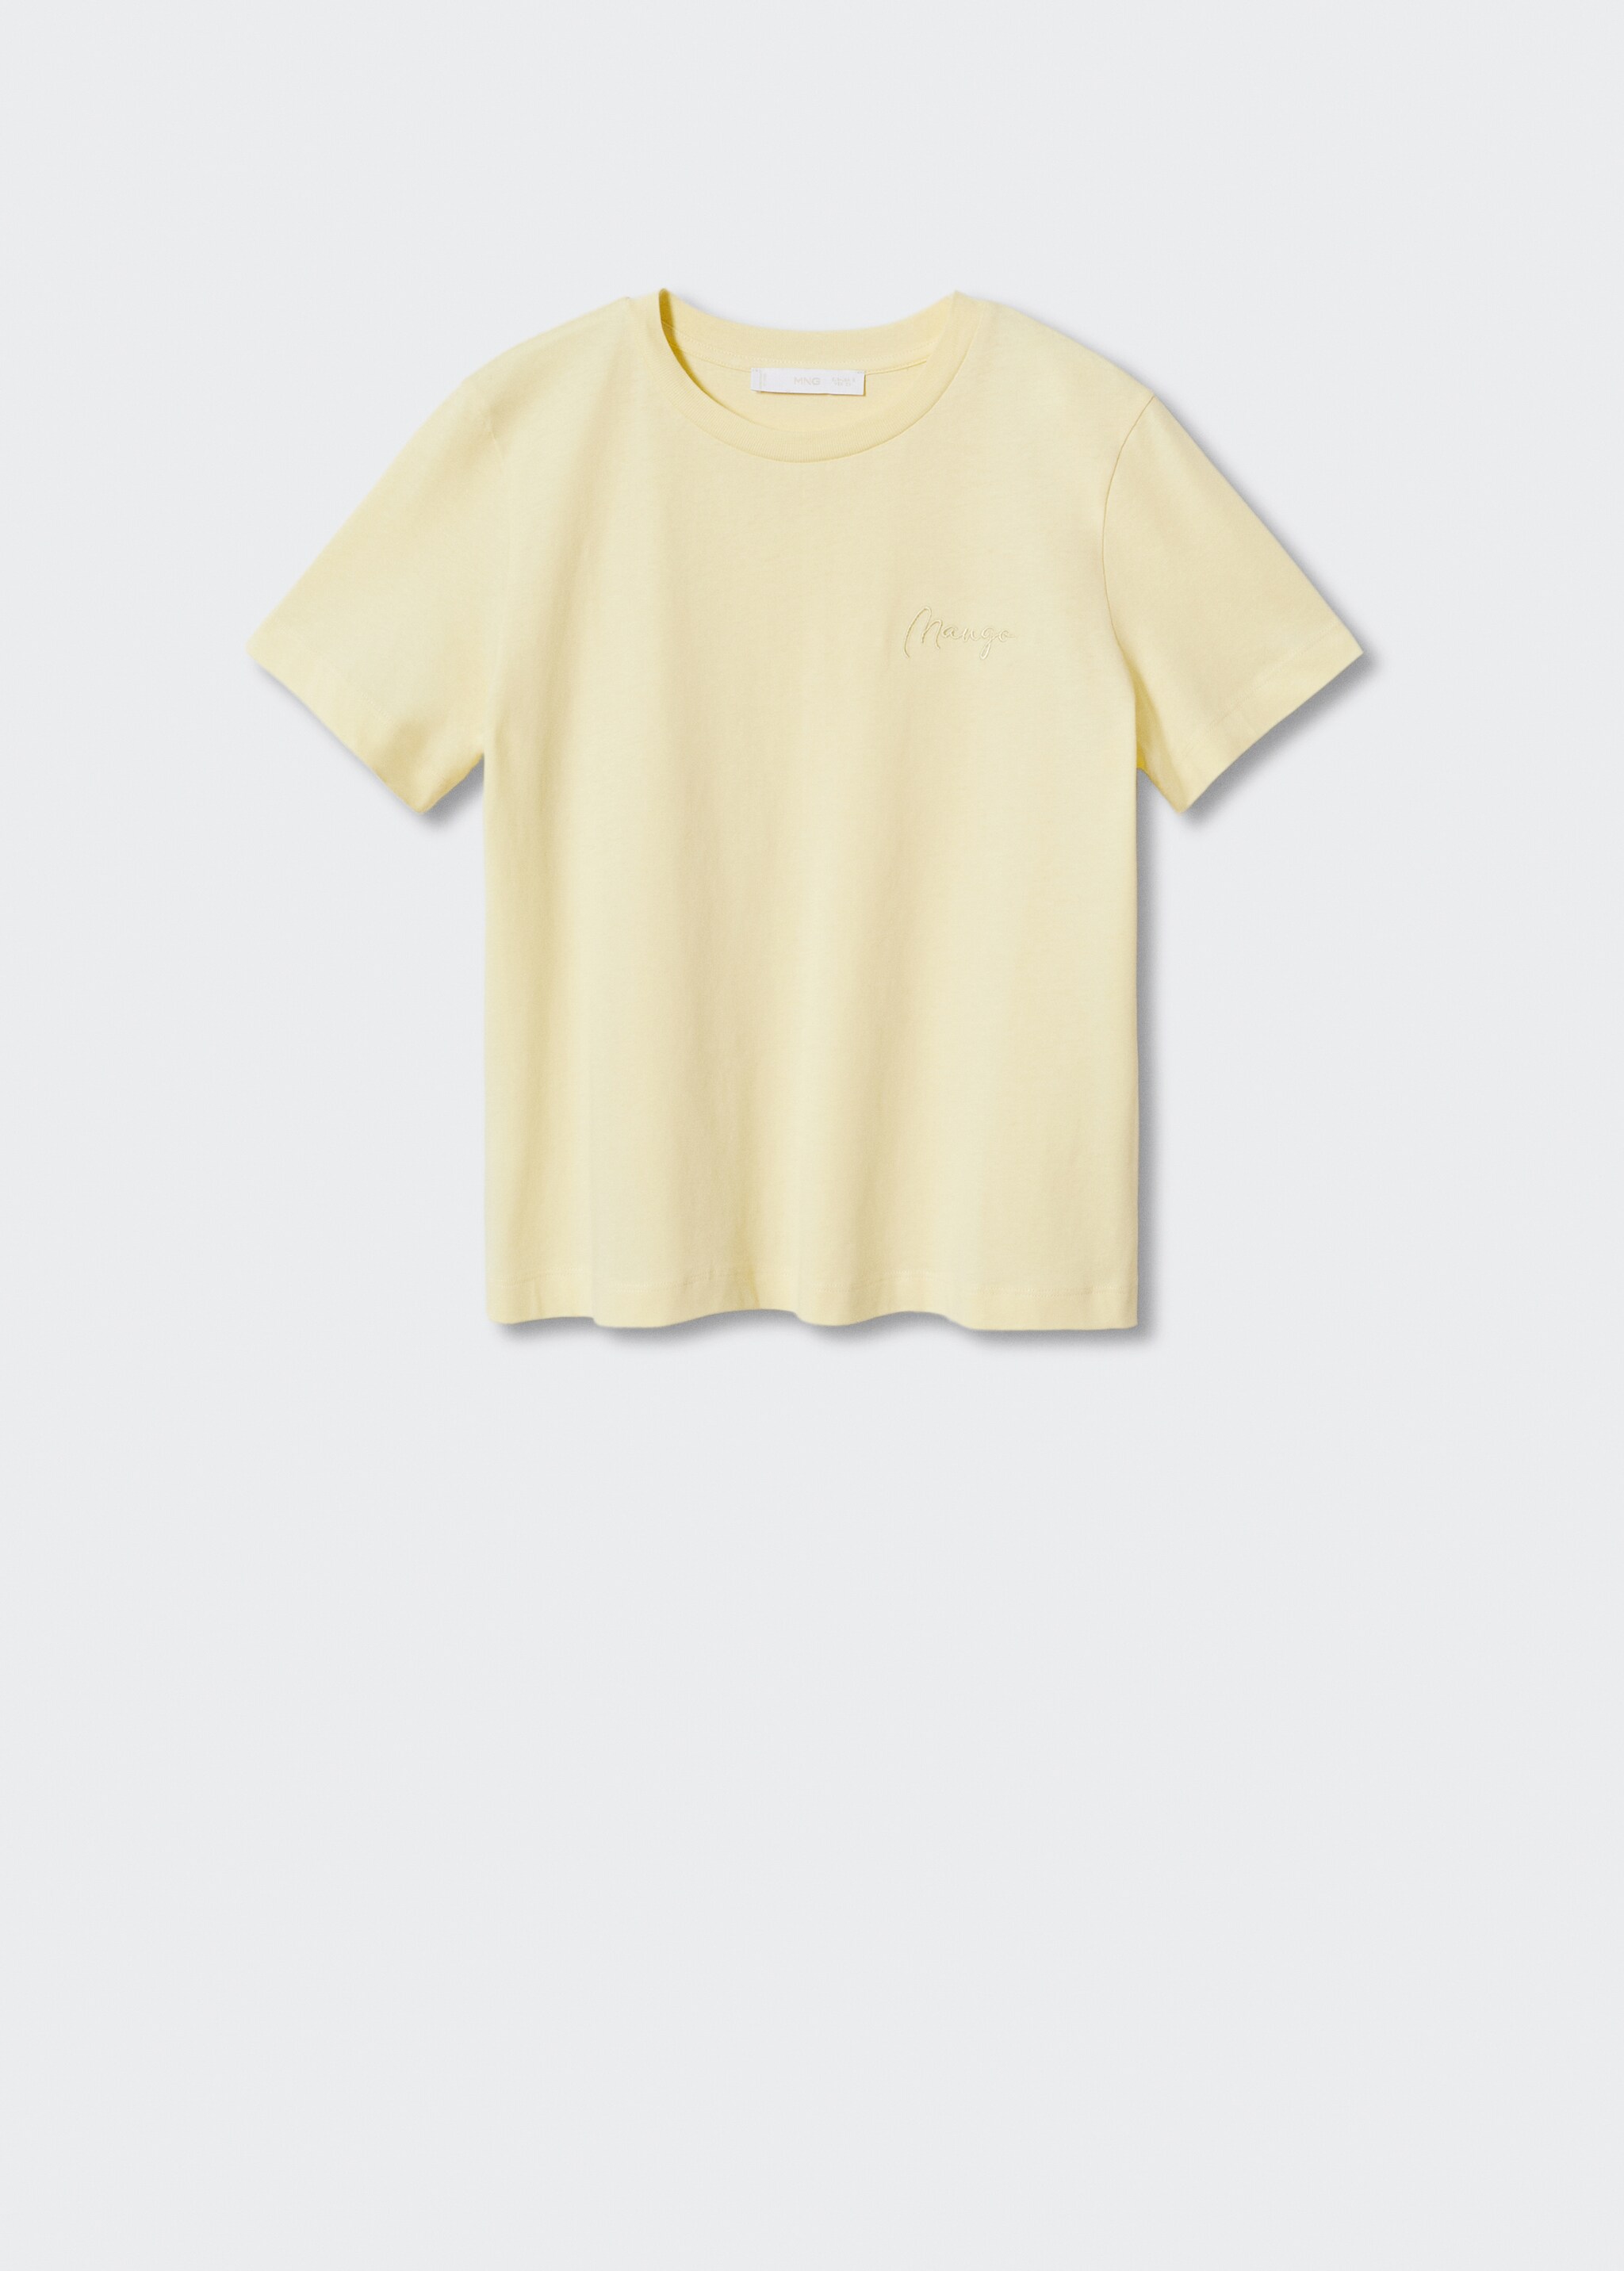 Rounded neck cotton t-shirt - Article without model